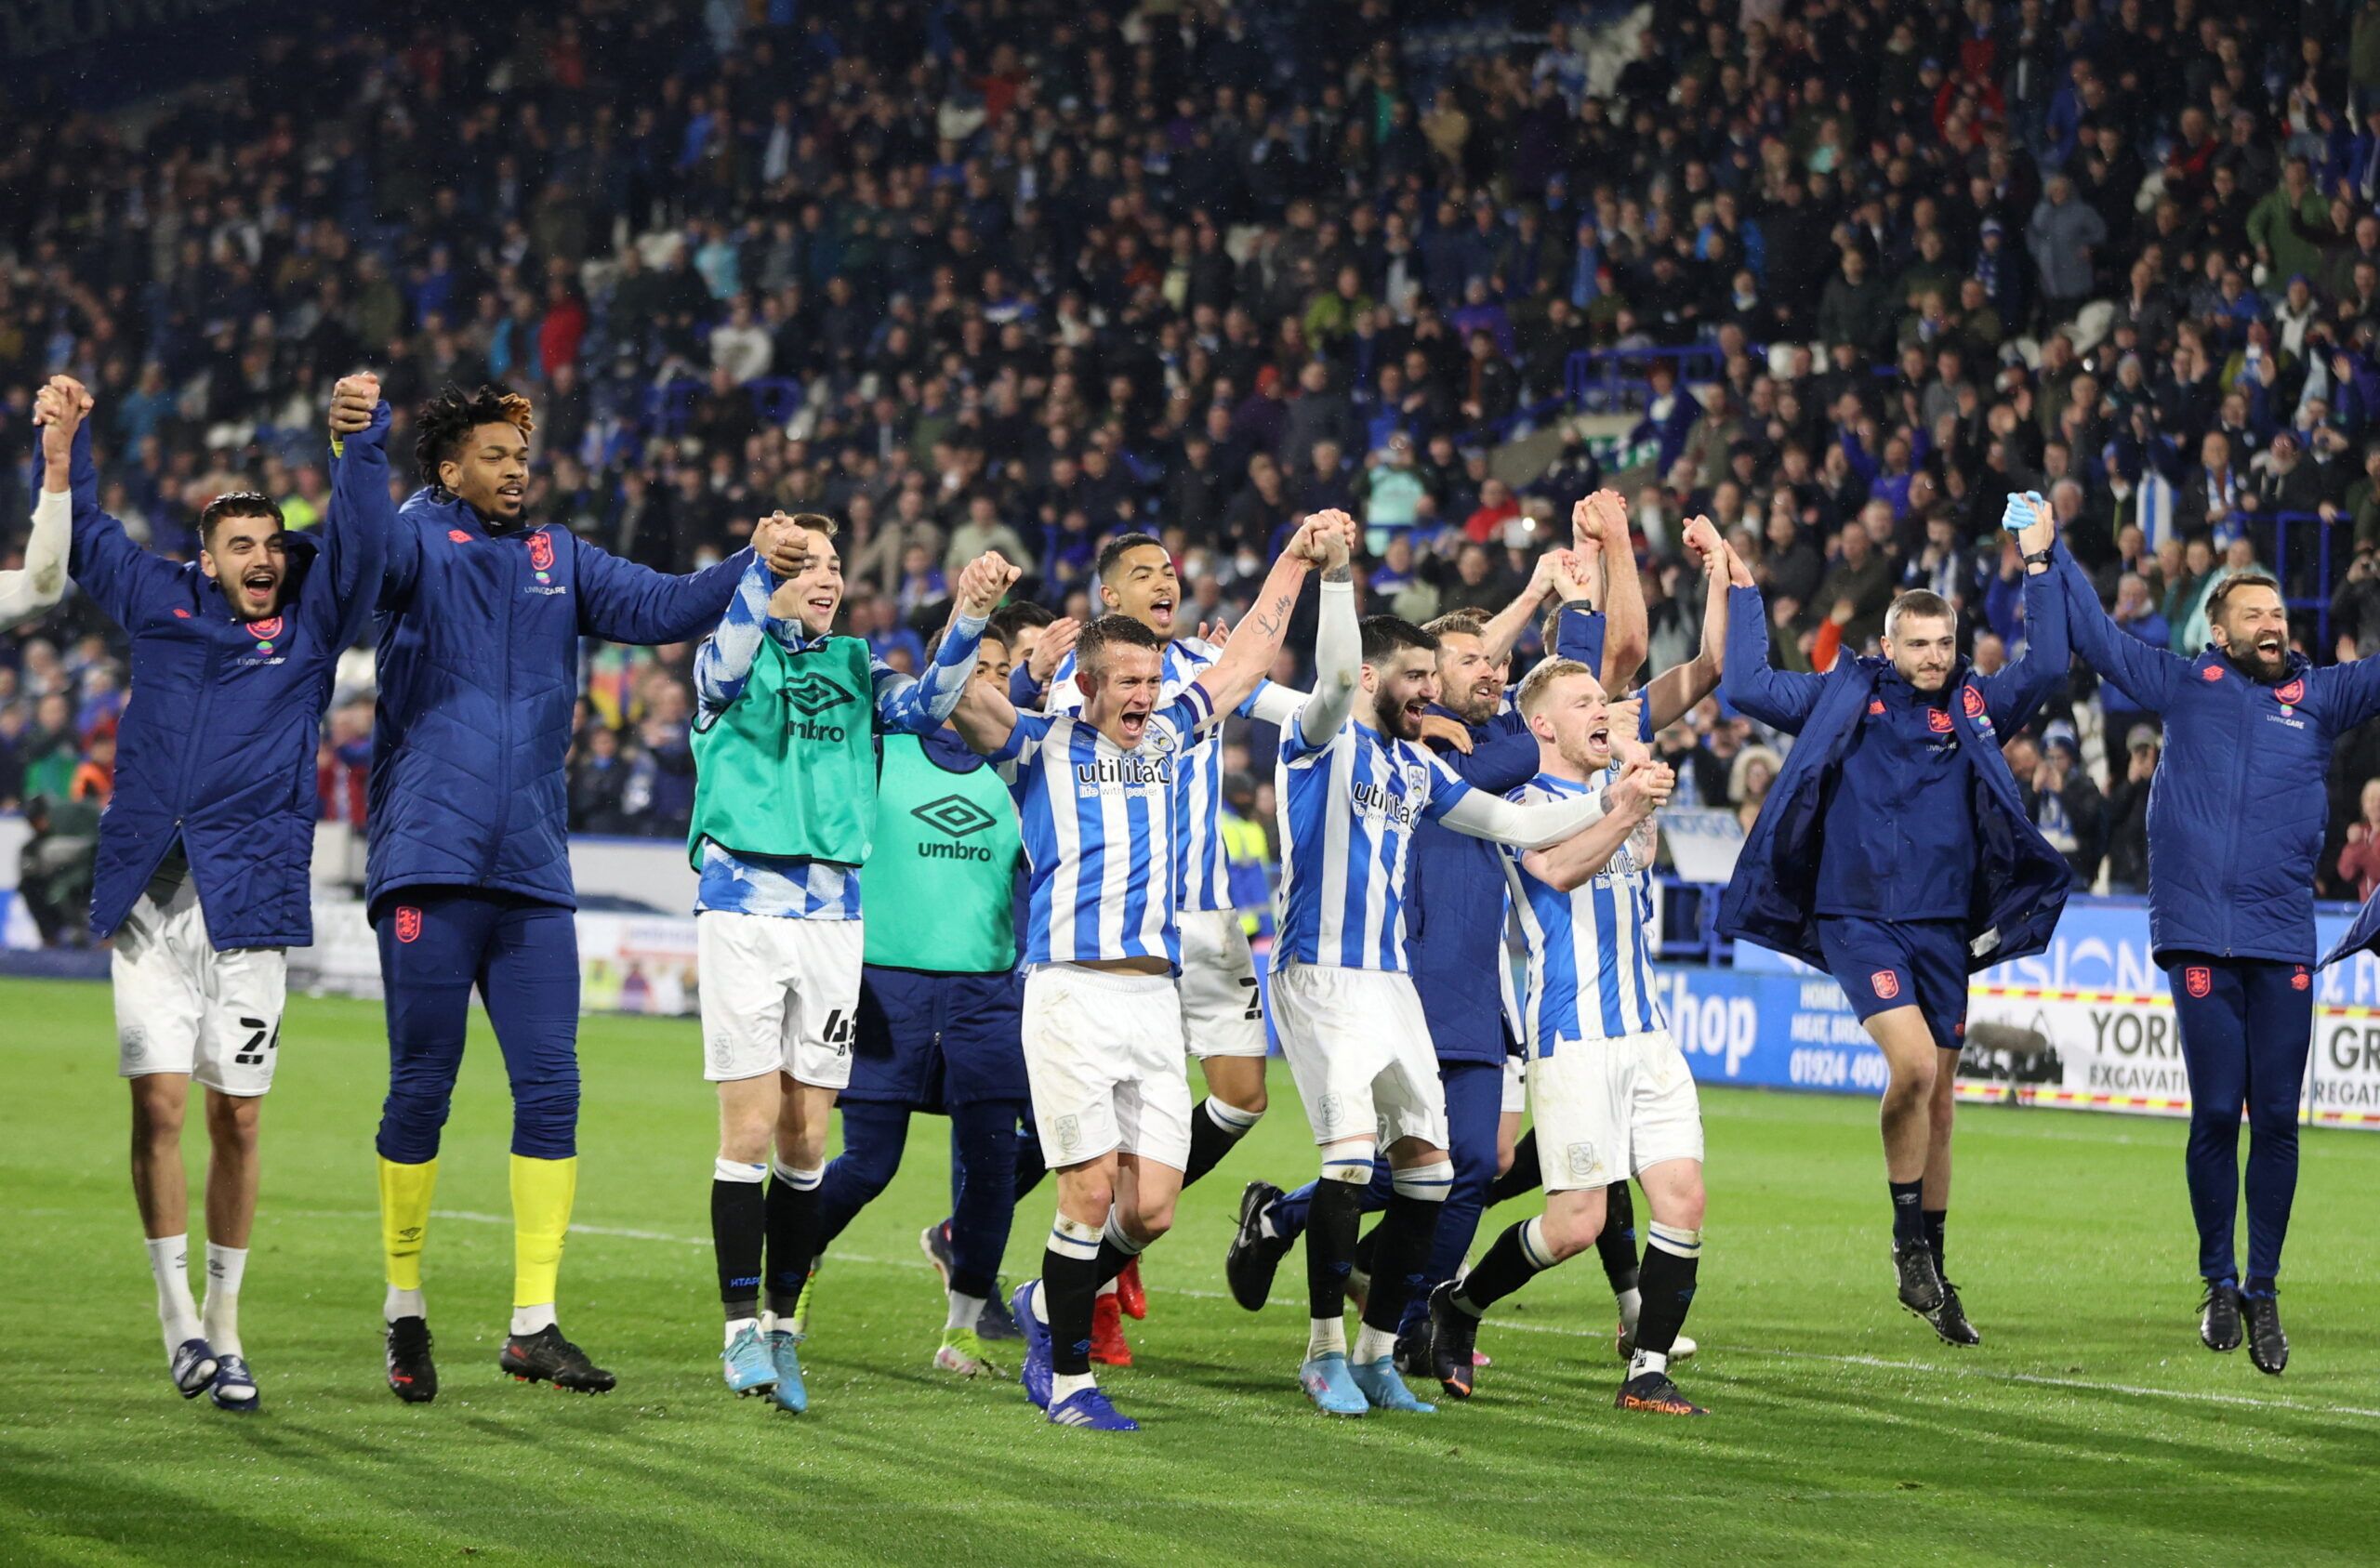 Soccer Football - Championship - Huddersfield Town v Luton Town - John Smith's Stadium, Huddersfield, Britain - April 11, 2022  Huddersfield Town players celebrate after the match   Action Images/Molly Darlington  EDITORIAL USE ONLY. No use with unauthorized audio, video, data, fixture lists, club/league logos or 